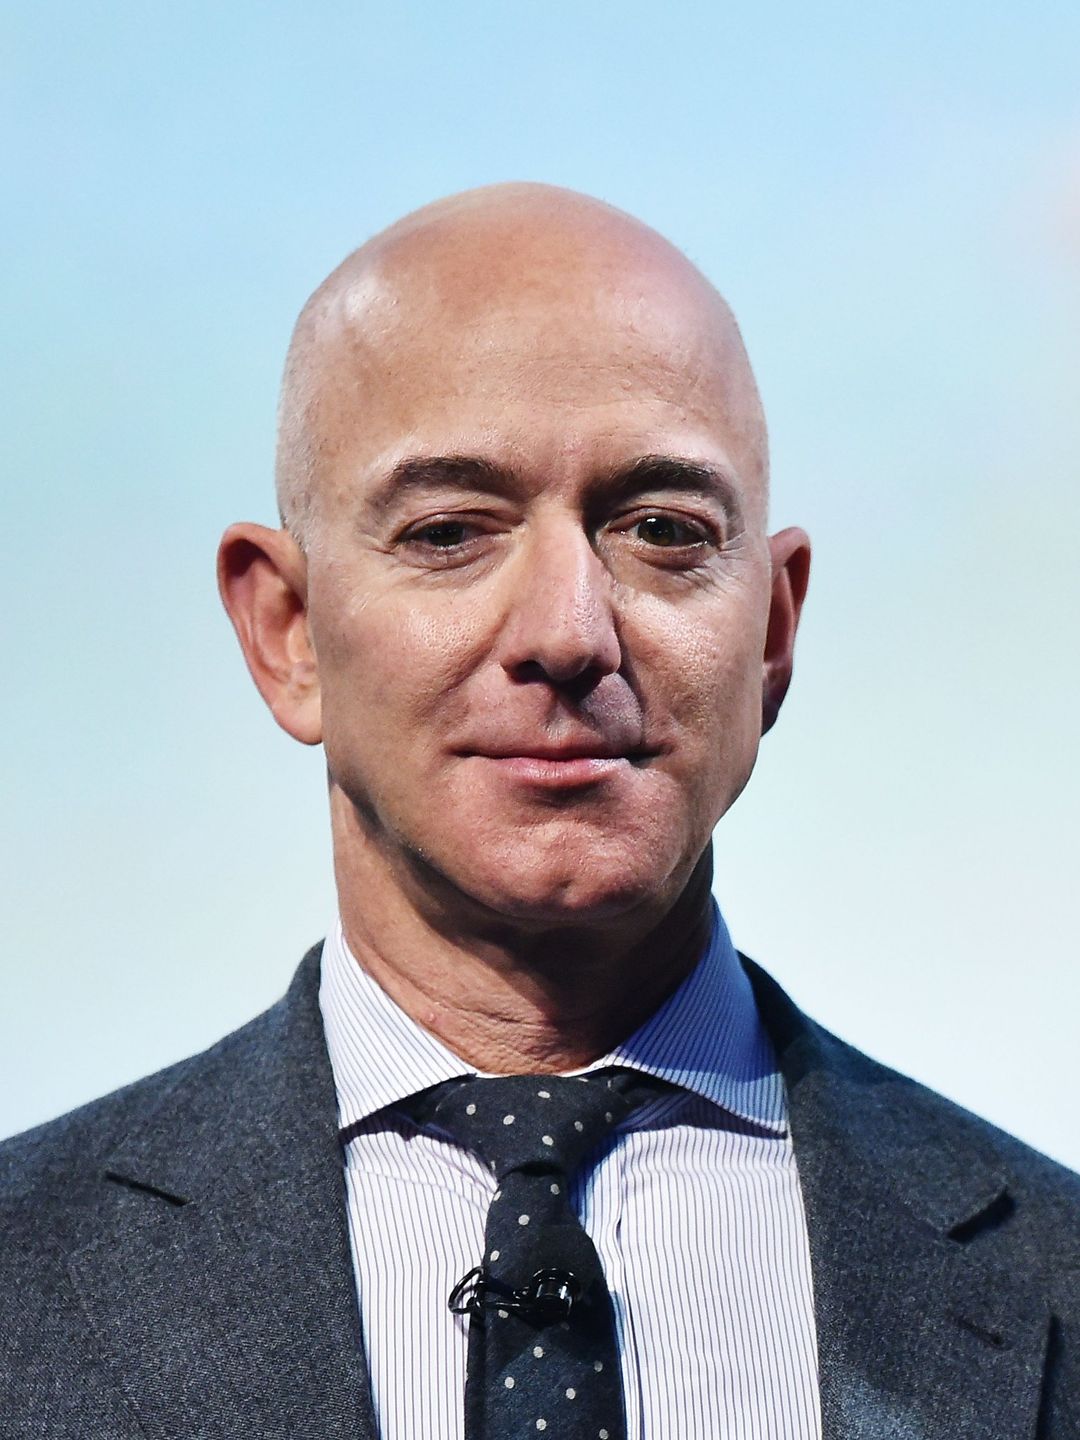 Jeff Bezos height and weight